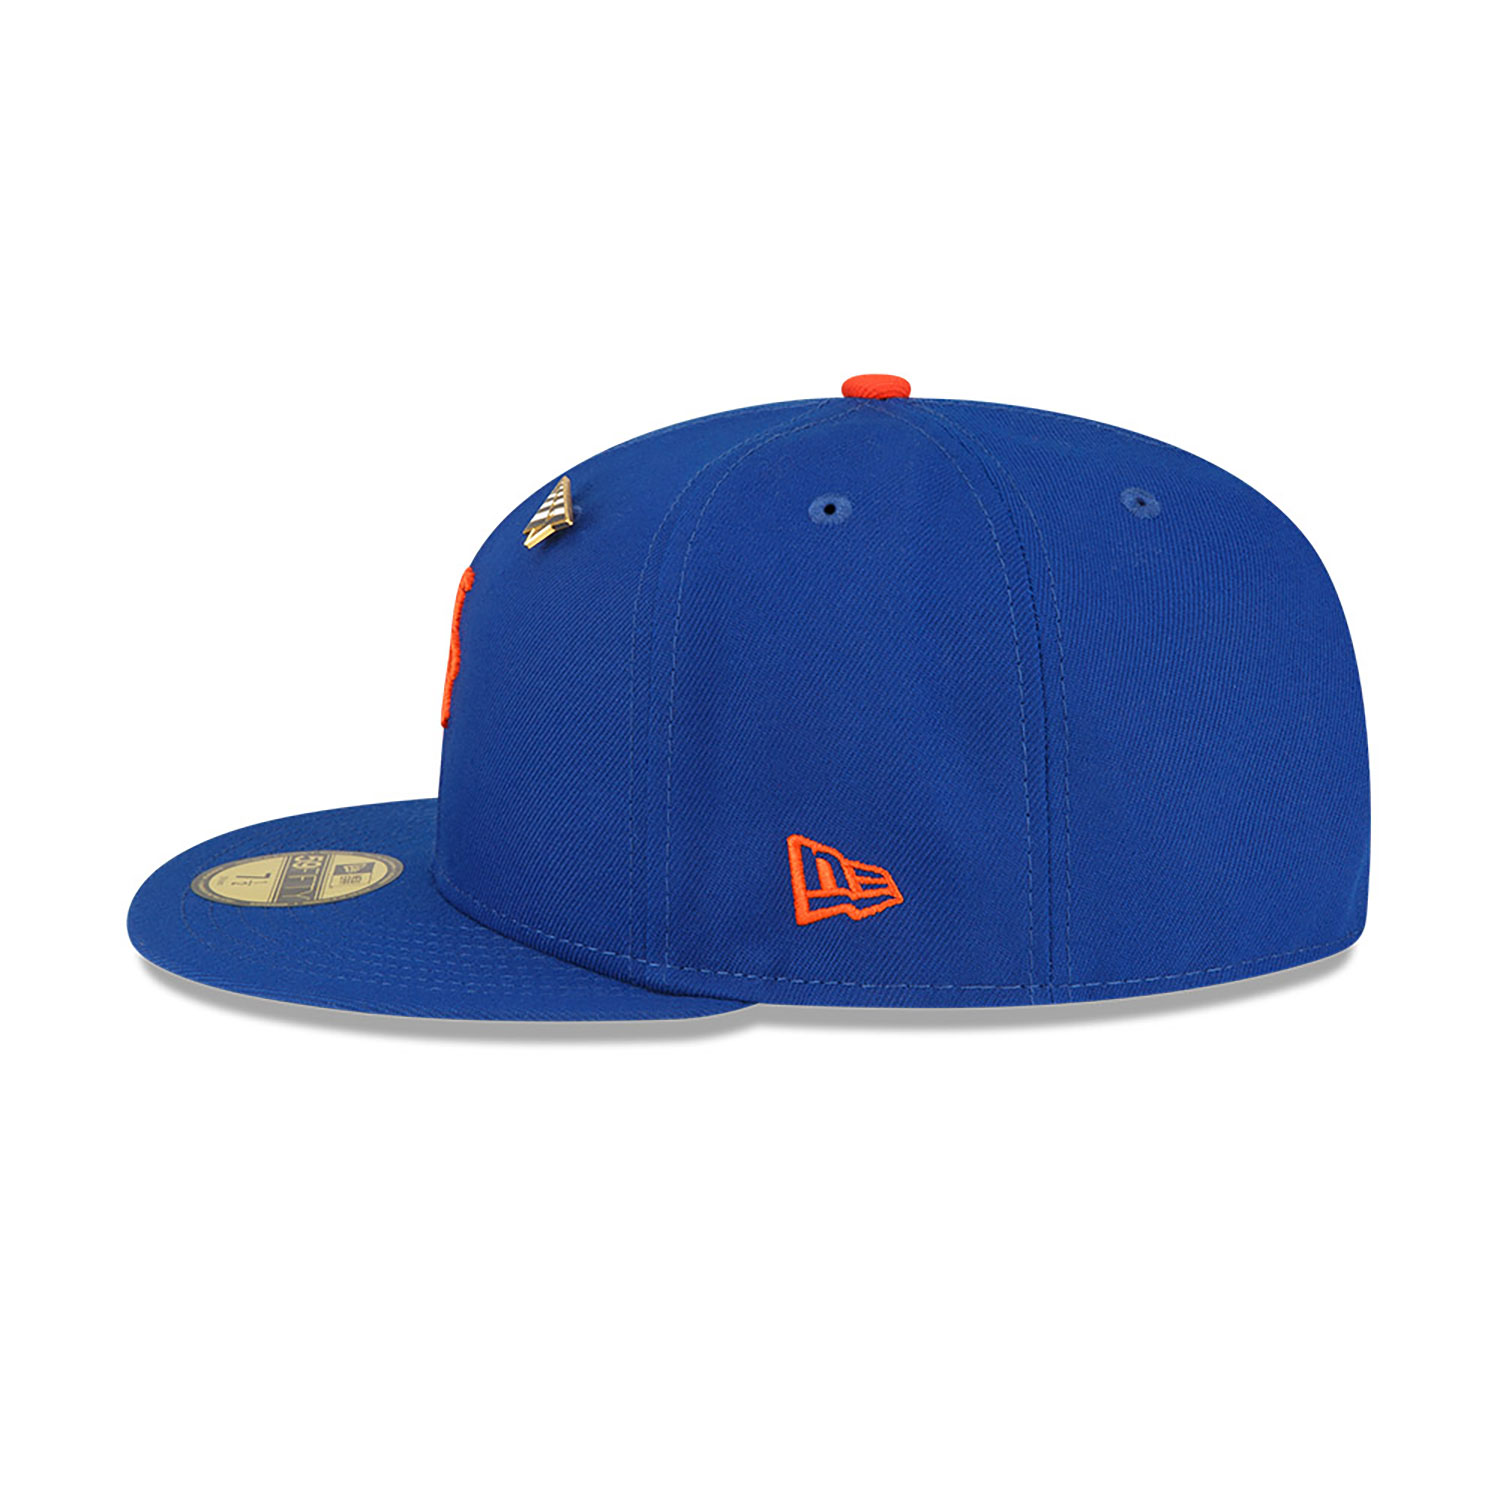 New York Mets Paper Planes x MLB Blue 59FIFTY Fitted Cap